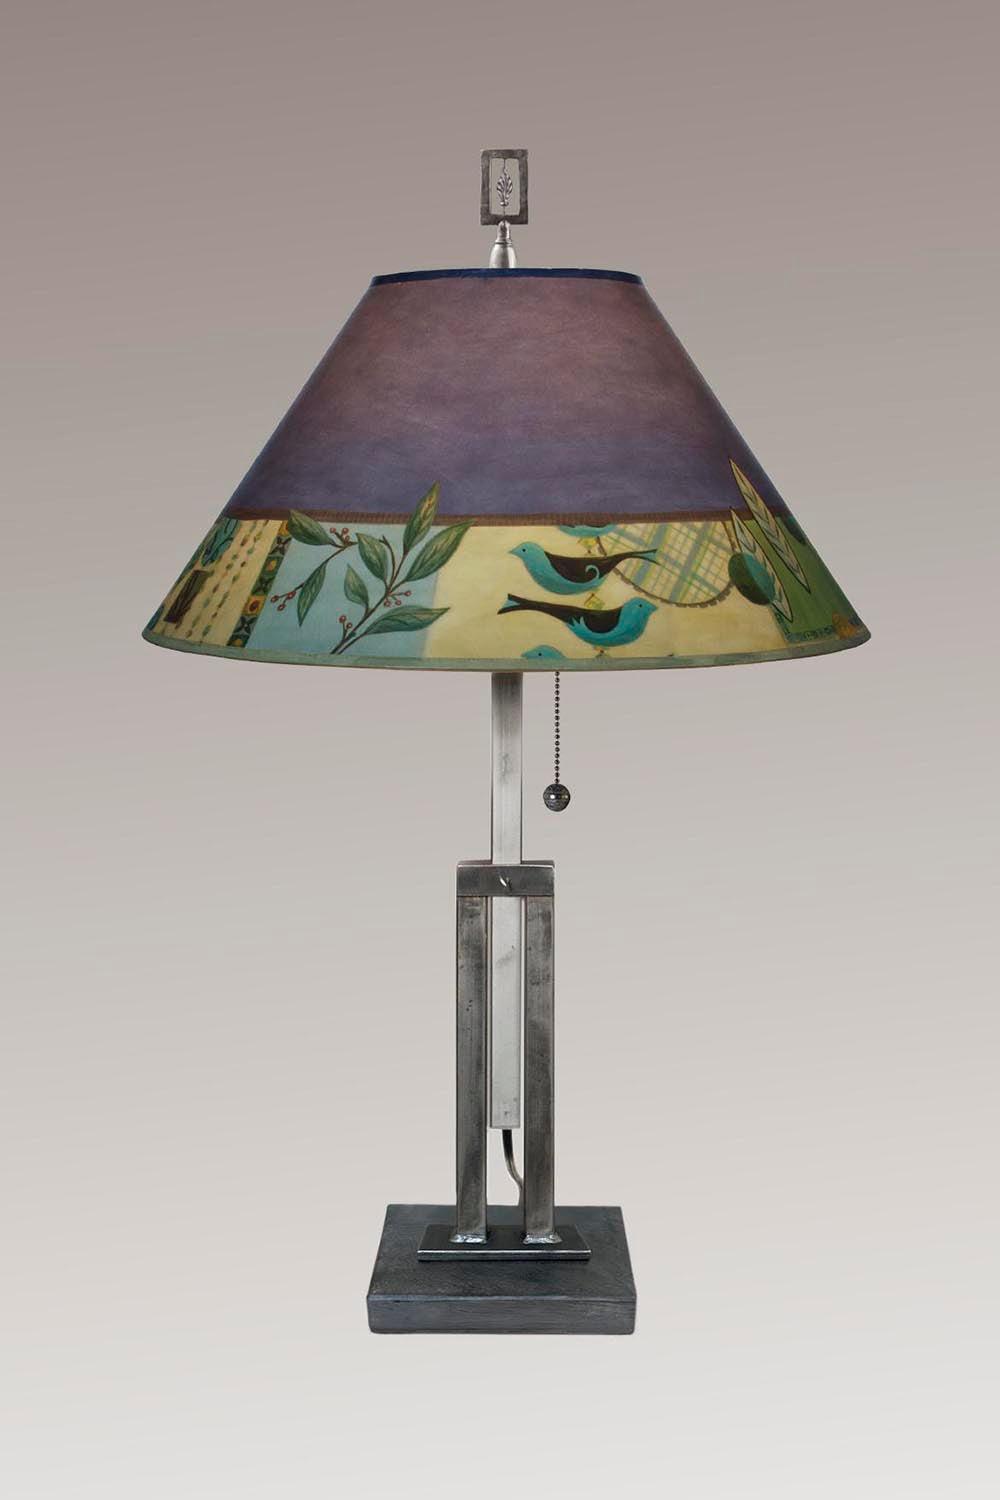 Janna Ugone &amp; Co Table Lamps Adjustable-Height Steel Table Lamp with Large Conical Shade in New Capri Periwinkle